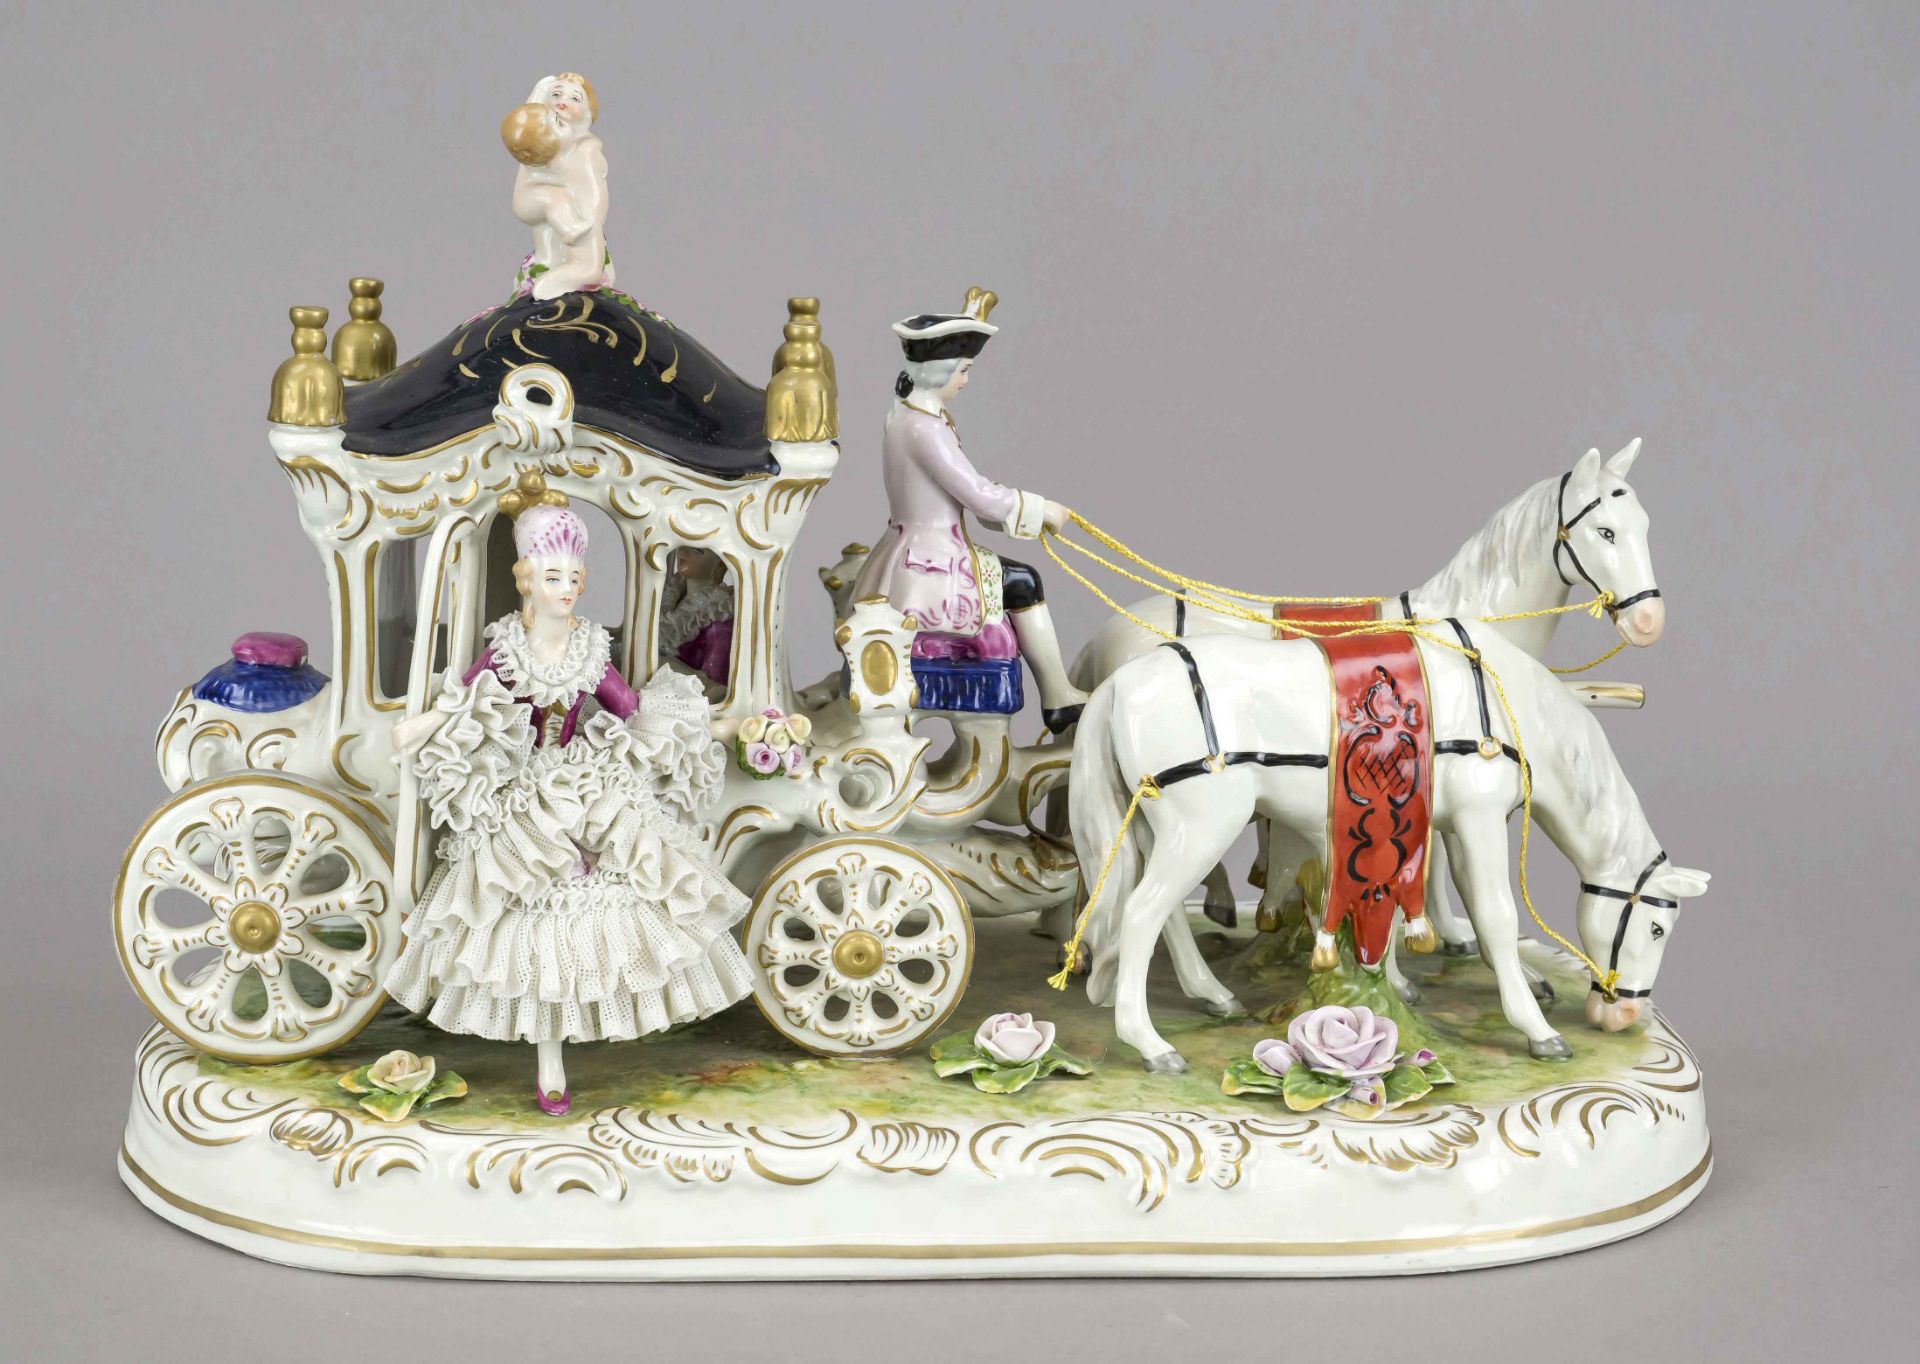 Rococo-style carriage, Müller & Co. Rudolstadt - Volkstedt, mark 1907-1952, two-horse carriage